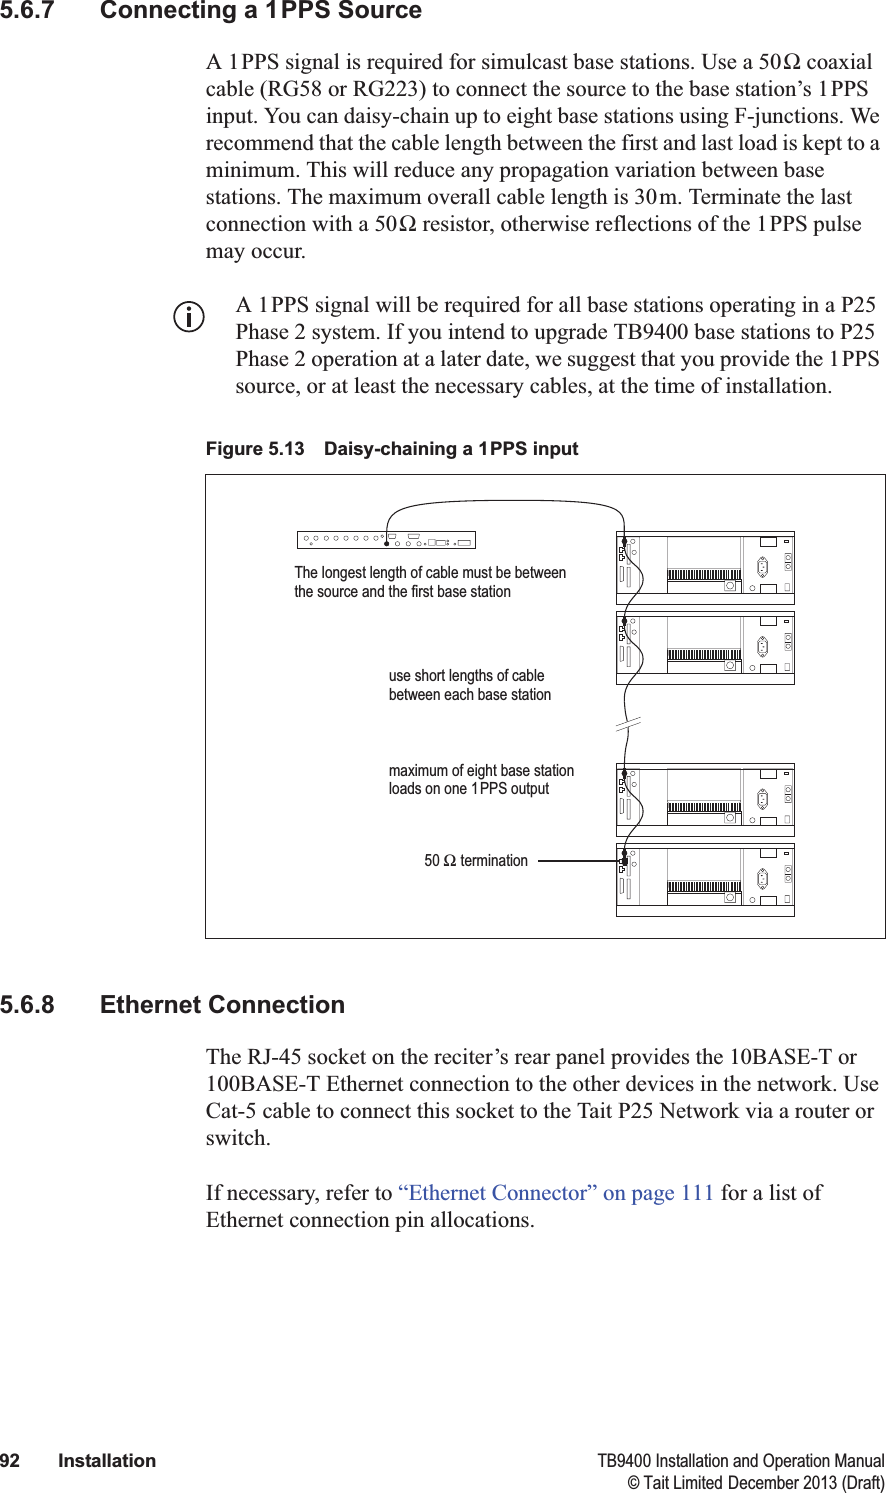  92 Installation TB9400 Installation and Operation Manual© Tait Limited December 2013 (Draft)5.6.7 Connecting a 1PPS SourceA 1PPS signal is required for simulcast base stations. Use a 50Ω coaxial cable (RG58 or RG223) to connect the source to the base station’s 1PPS input. You can daisy-chain up to eight base stations using F-junctions. We recommend that the cable length between the first and last load is kept to a minimum. This will reduce any propagation variation between base stations. The maximum overall cable length is 30m. Terminate the last connection with a 50Ω resistor, otherwise reflections of the 1PPS pulse may occur. A 1PPS signal will be required for all base stations operating in a P25 Phase 2 system. If you intend to upgrade TB9400 base stations to P25 Phase 2 operation at a later date, we suggest that you provide the 1PPS source, or at least the necessary cables, at the time of installation.5.6.8 Ethernet ConnectionThe RJ-45 socket on the reciter’s rear panel provides the 10BASE-T or 100BASE-T Ethernet connection to the other devices in the network. Use Cat-5 cable to connect this socket to the Tait P25 Network via a router or switch. If necessary, refer to “Ethernet Connector” on page 111 for a list of Ethernet connection pin allocations.Figure 5.13 Daisy-chaining a 1PPS inputThe longest length of cable must be between the source and the first base stationuse short lengths of cable between each base stationmaximum of eight base station loads on one 1PPS output50 Ω termination